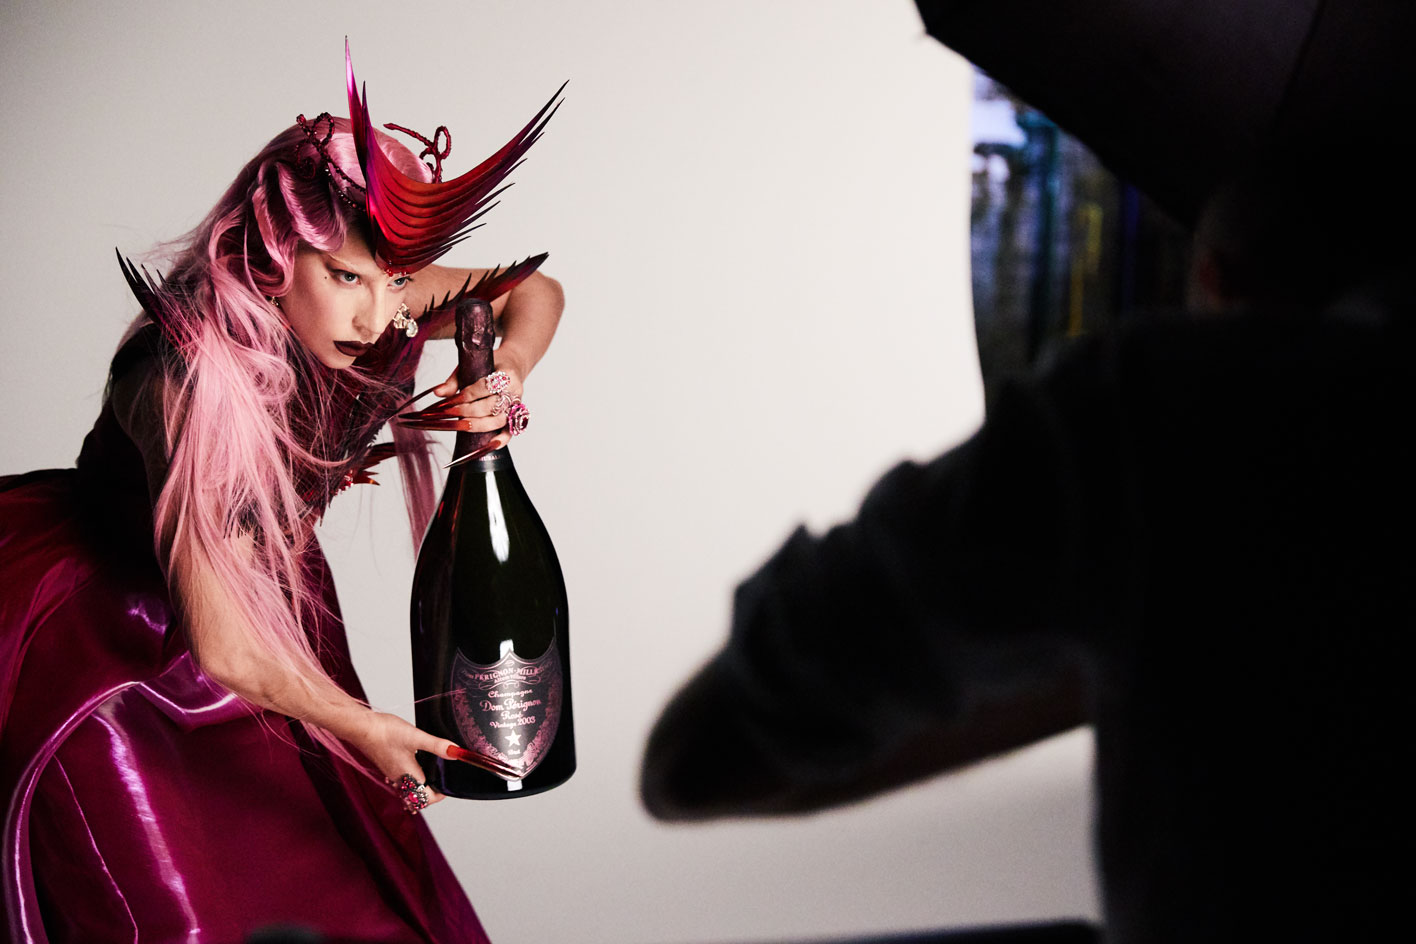 Where to buy Dom Perignon x Lady Gaga Rose, Champagne, France